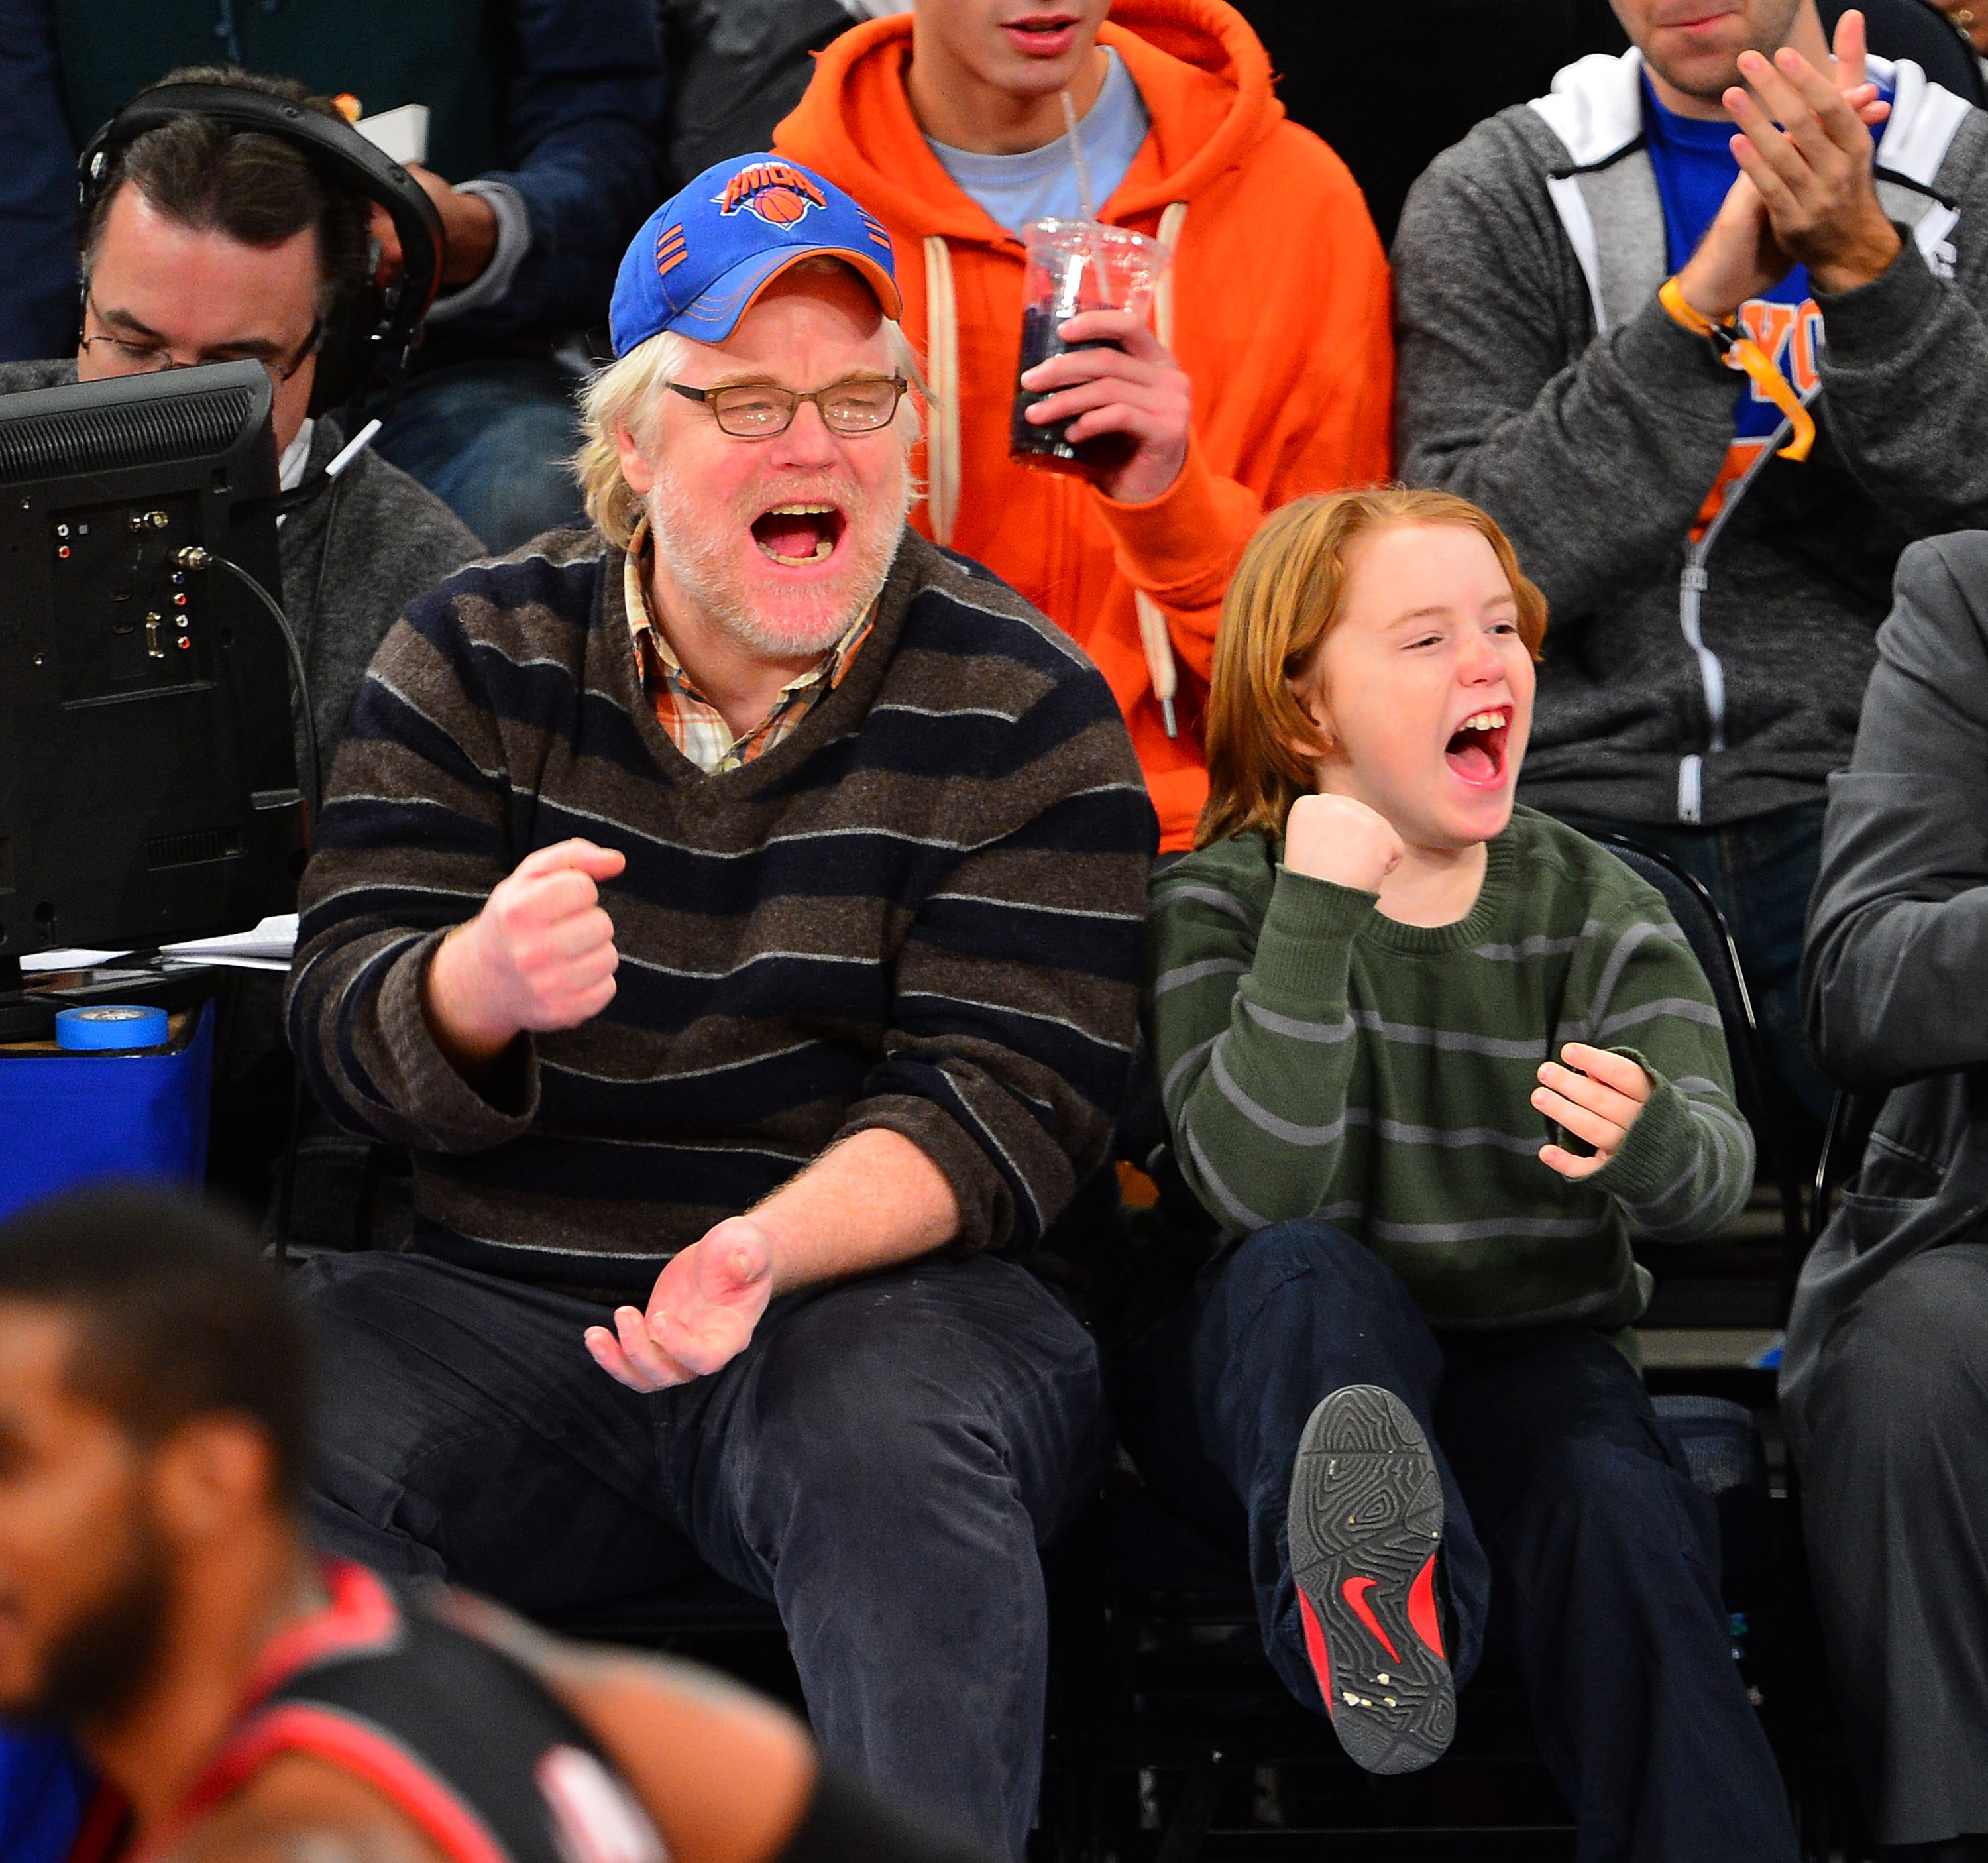 <p>Oscar winner Philip Seymour Hoffman had a blast with then-9-year-old son Cooper Hoffman -- whose mom is theater artistic director Mimi O'Donnell -- at a Portland Trail Blazers vs. New York Knicks NBA game at Madison Square Garden in New York City on Jan. 1, 2013. Philip tragically died at 46 from an accidental drug overdose just a year later. Keep reading to see Cooper as he follows in his dad's footsteps...</p>